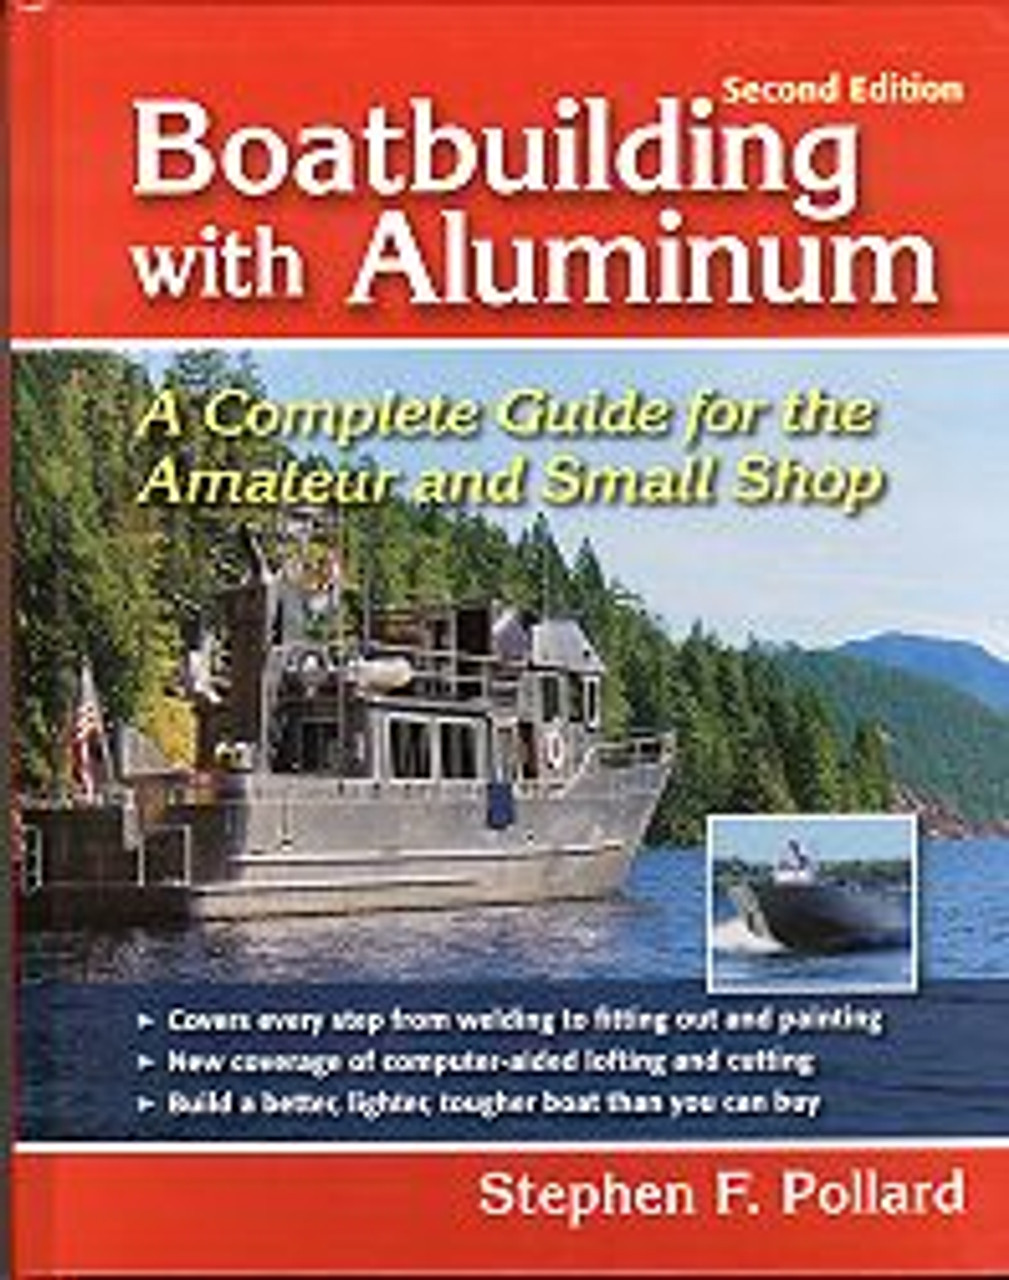 Boatbuilding with Aluminum-Second Edition